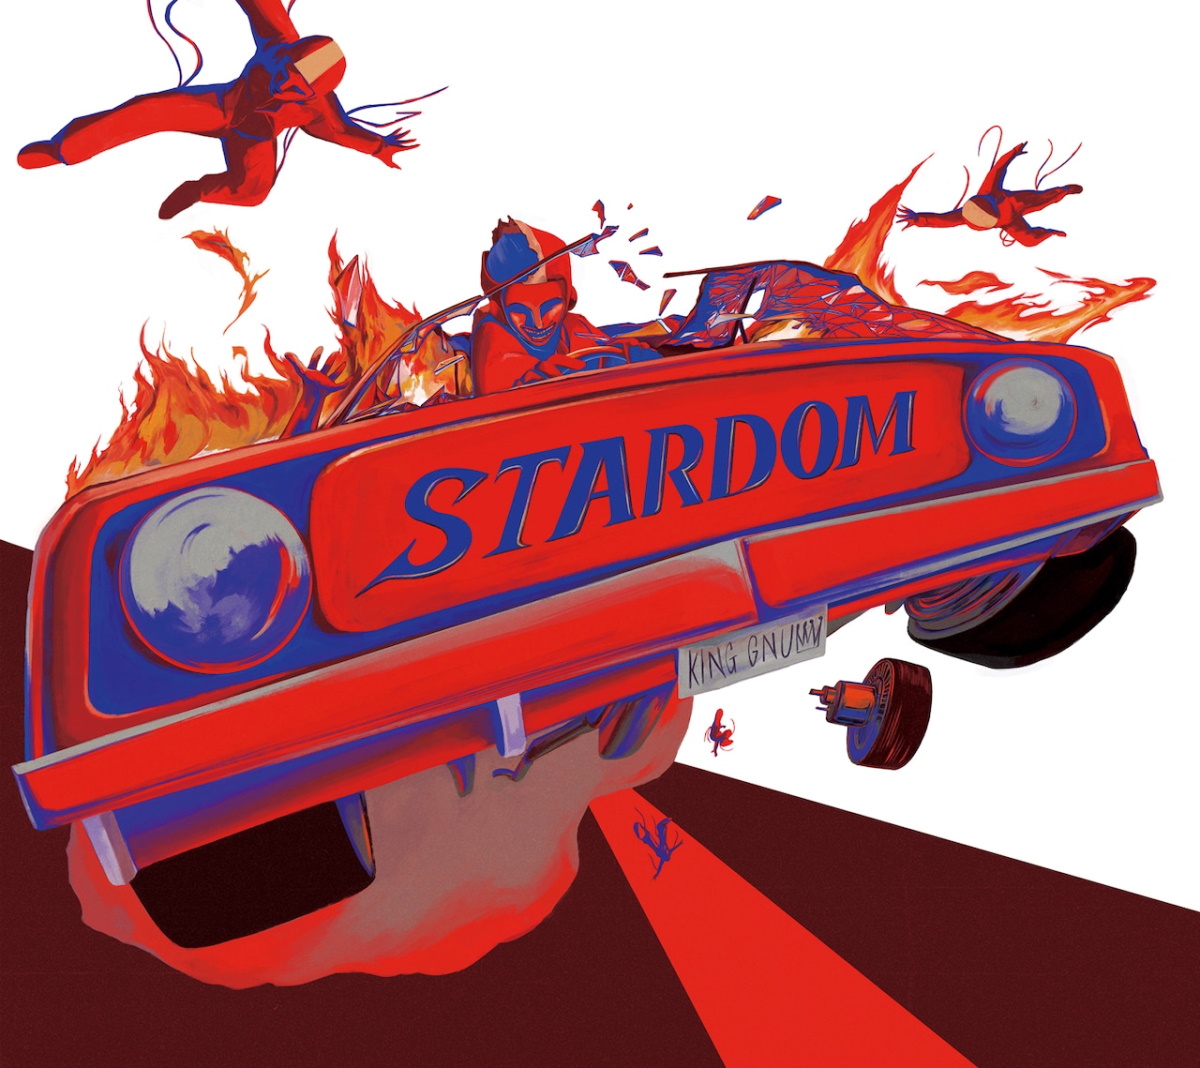 Cover art for『King Gnu - Stardom』from the release『Stardom』